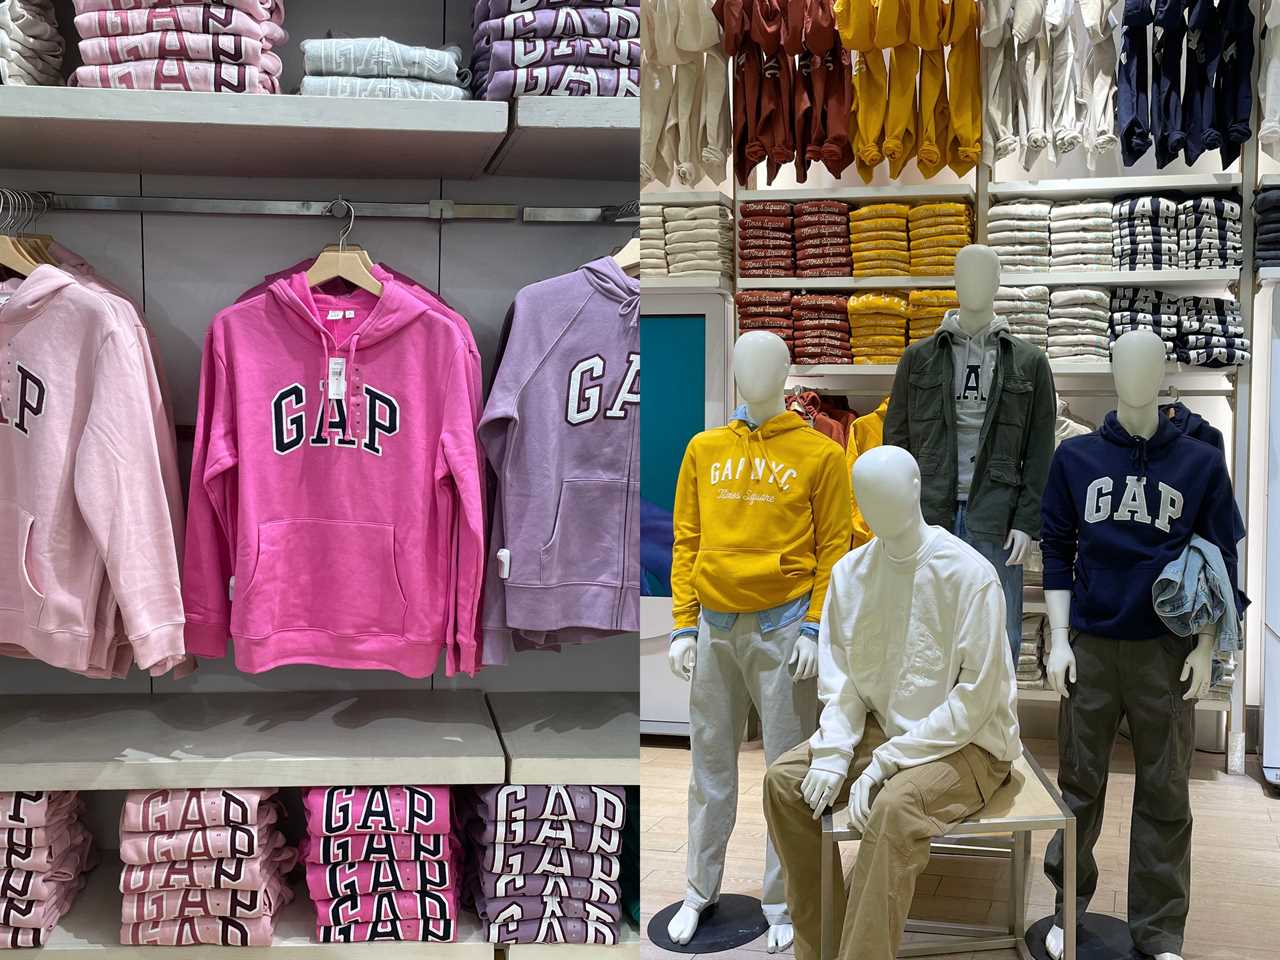 composite image of Gap sweatshirts in two Gap stores